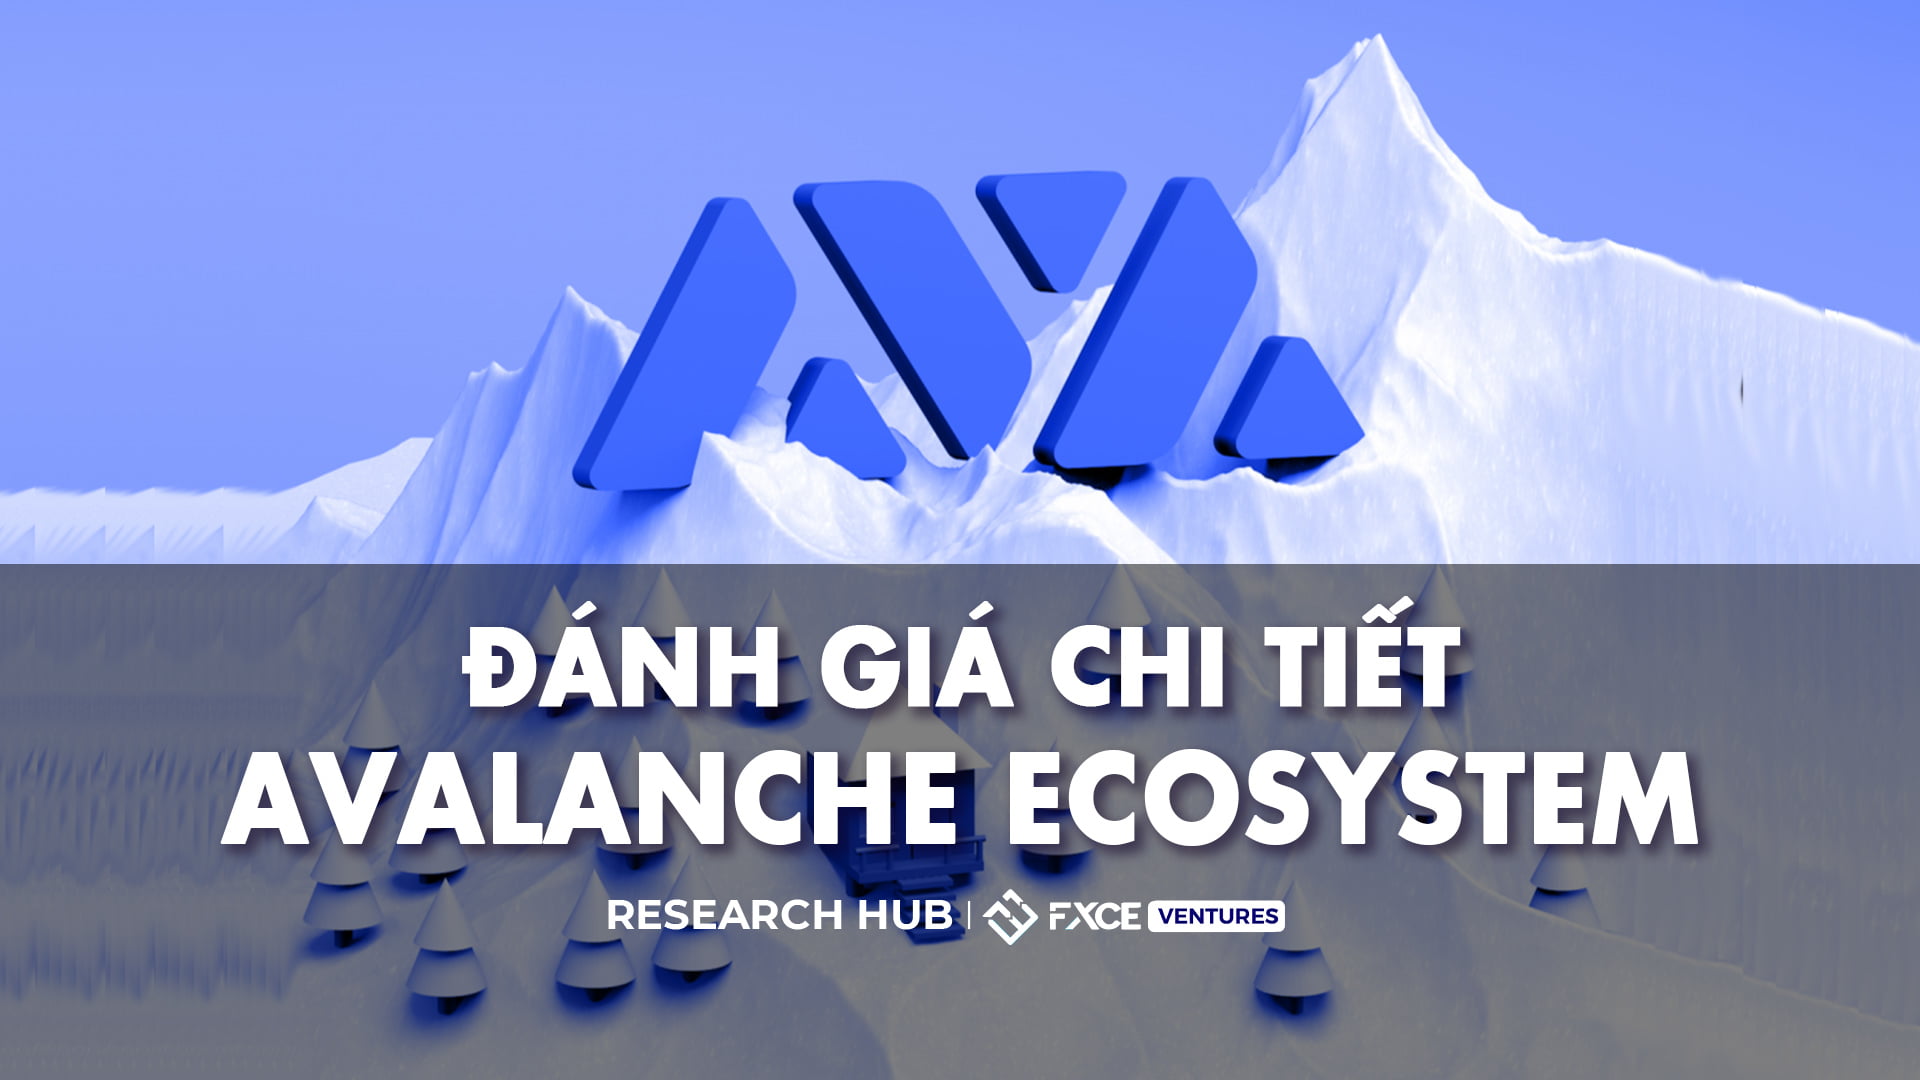 DEEP DIVE INTO THE AVALANCHE ECOSYSTEM